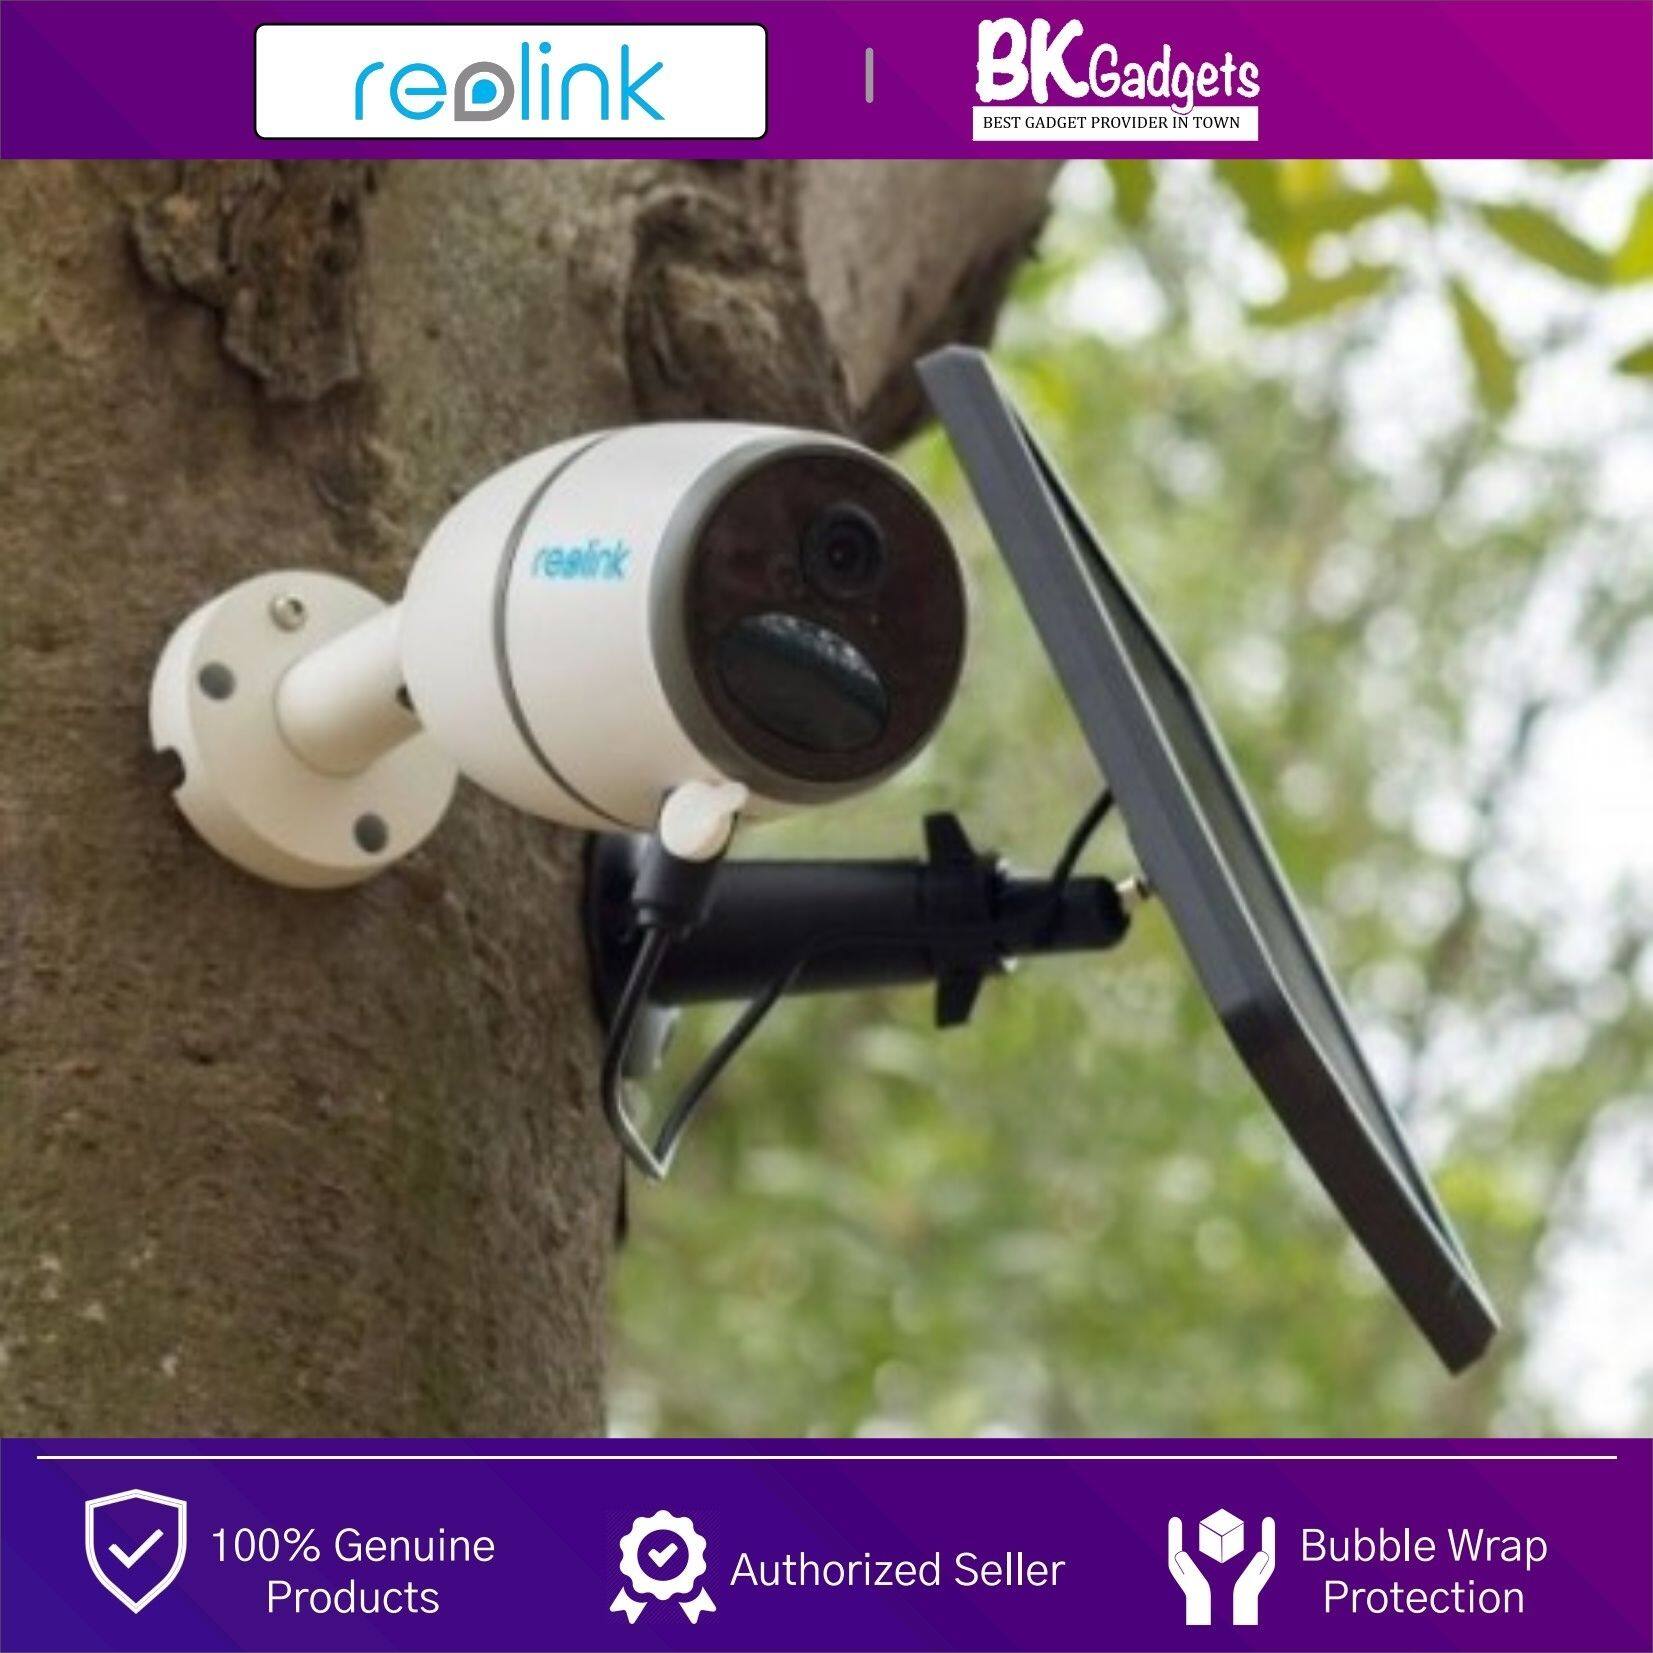 Reolink GO 1080P Full HD 4G LTE Mobile Security IP Camera CCTV - CMOS | 110 Diagonal | 7800mAh Rechargeable Battery | 2 Way Audio | Night Vision 10m | Pan & Tilt | PIR Motion Detect | Outdoor IP65